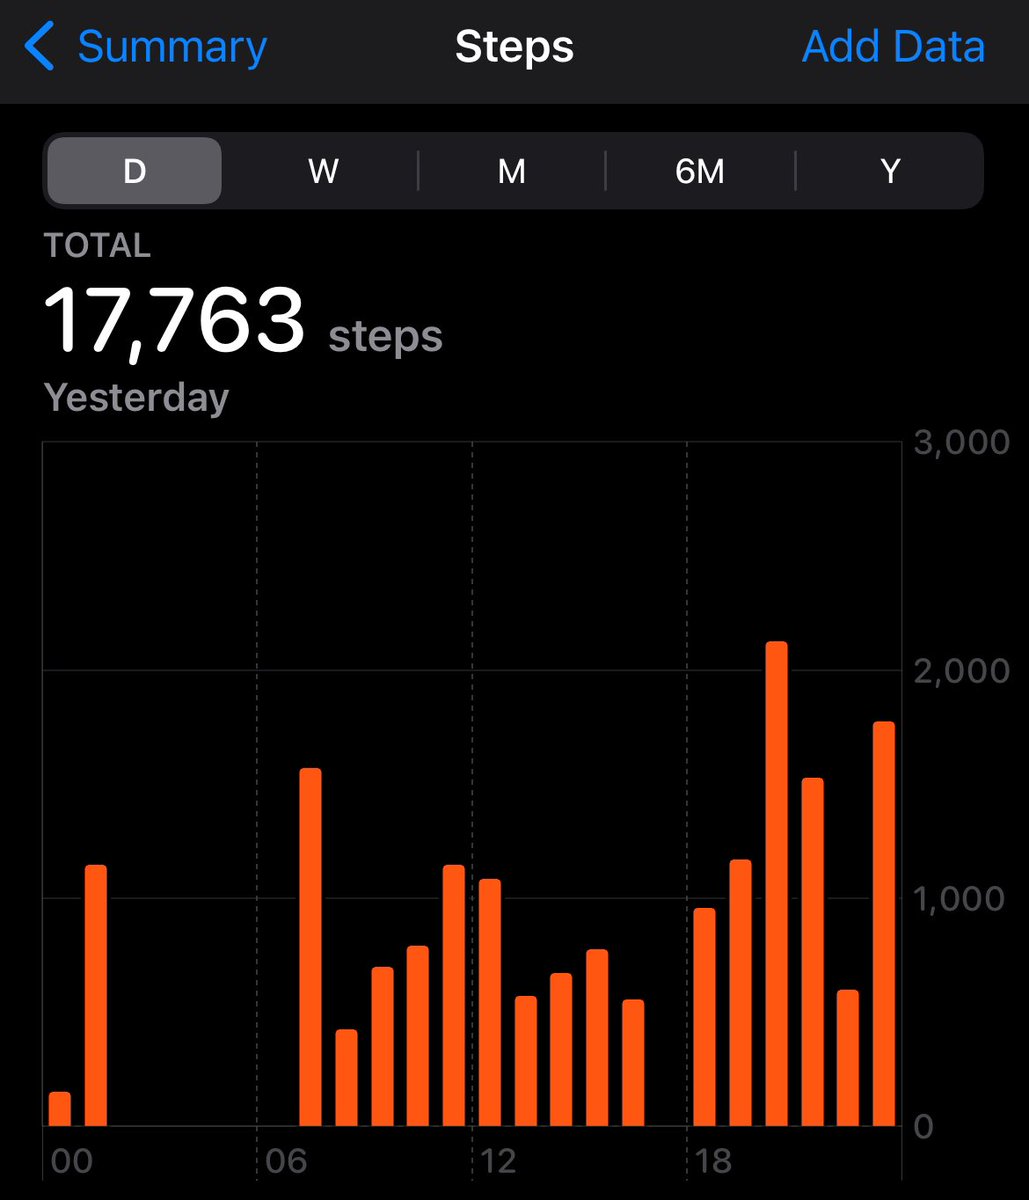 Coming to the end of a vibrant, packed, and excellent #europcr2024 One of the bonuses of major conferences is we give our step count a bit of boost. I wonder who has the highest count at the conference for a single day? My best effort below, but I bet someone hit 30k